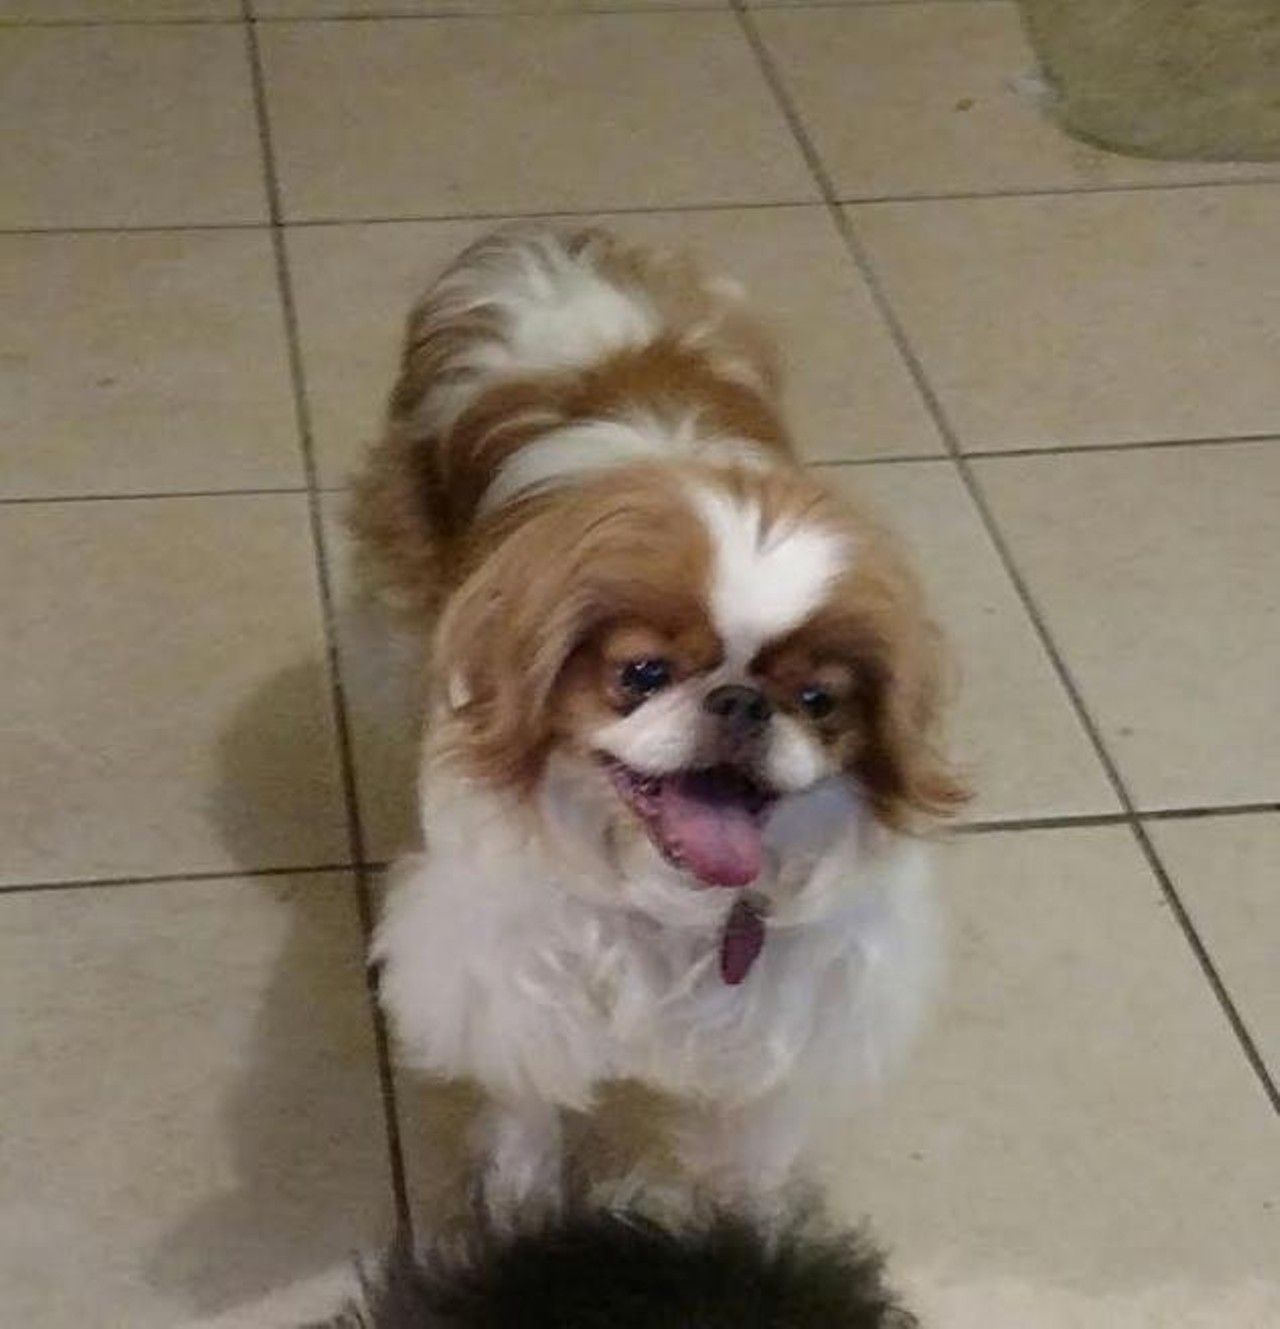  Winston Churchill
Japanese Chin | Male 
NEVER MIND, THIS DOG HAS THE BEST NAME EVER.